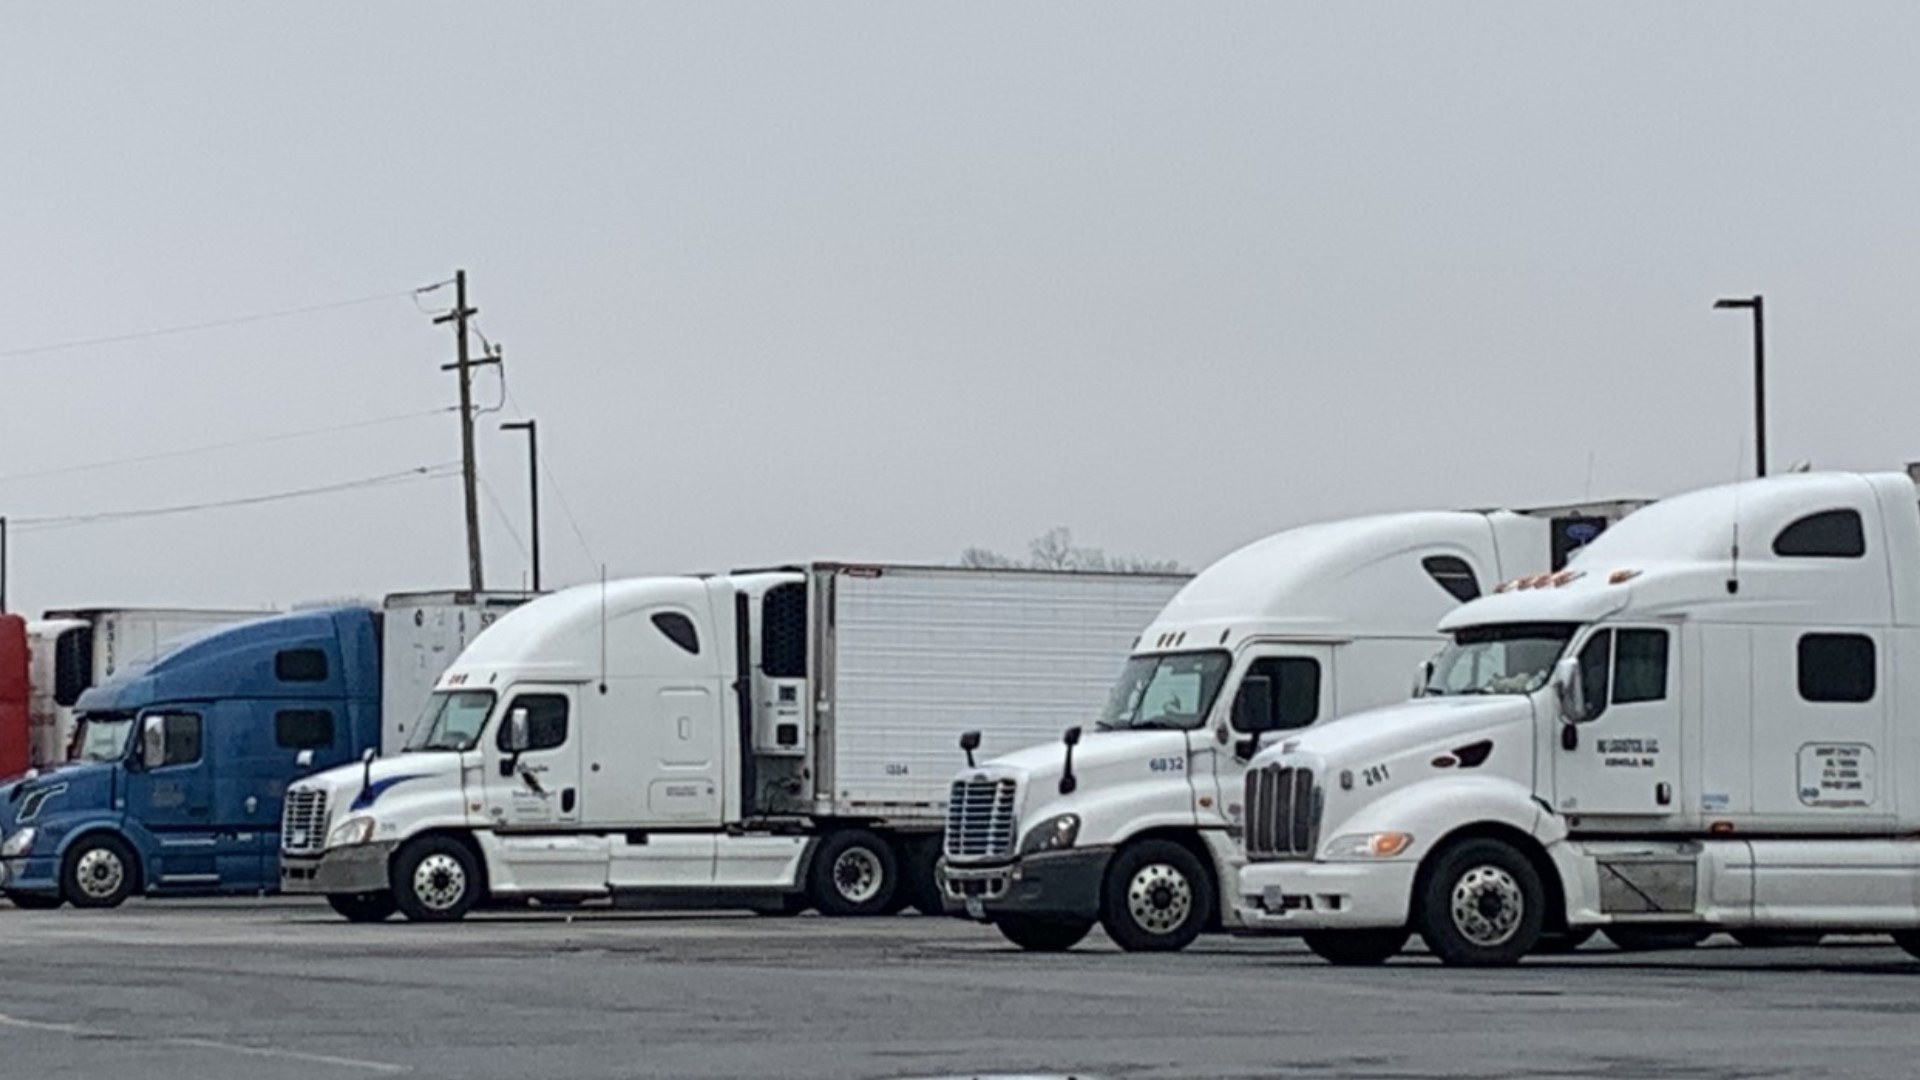 Congress hopes the pilot program will alleviate the supply chain demand and the truck driver shortage.